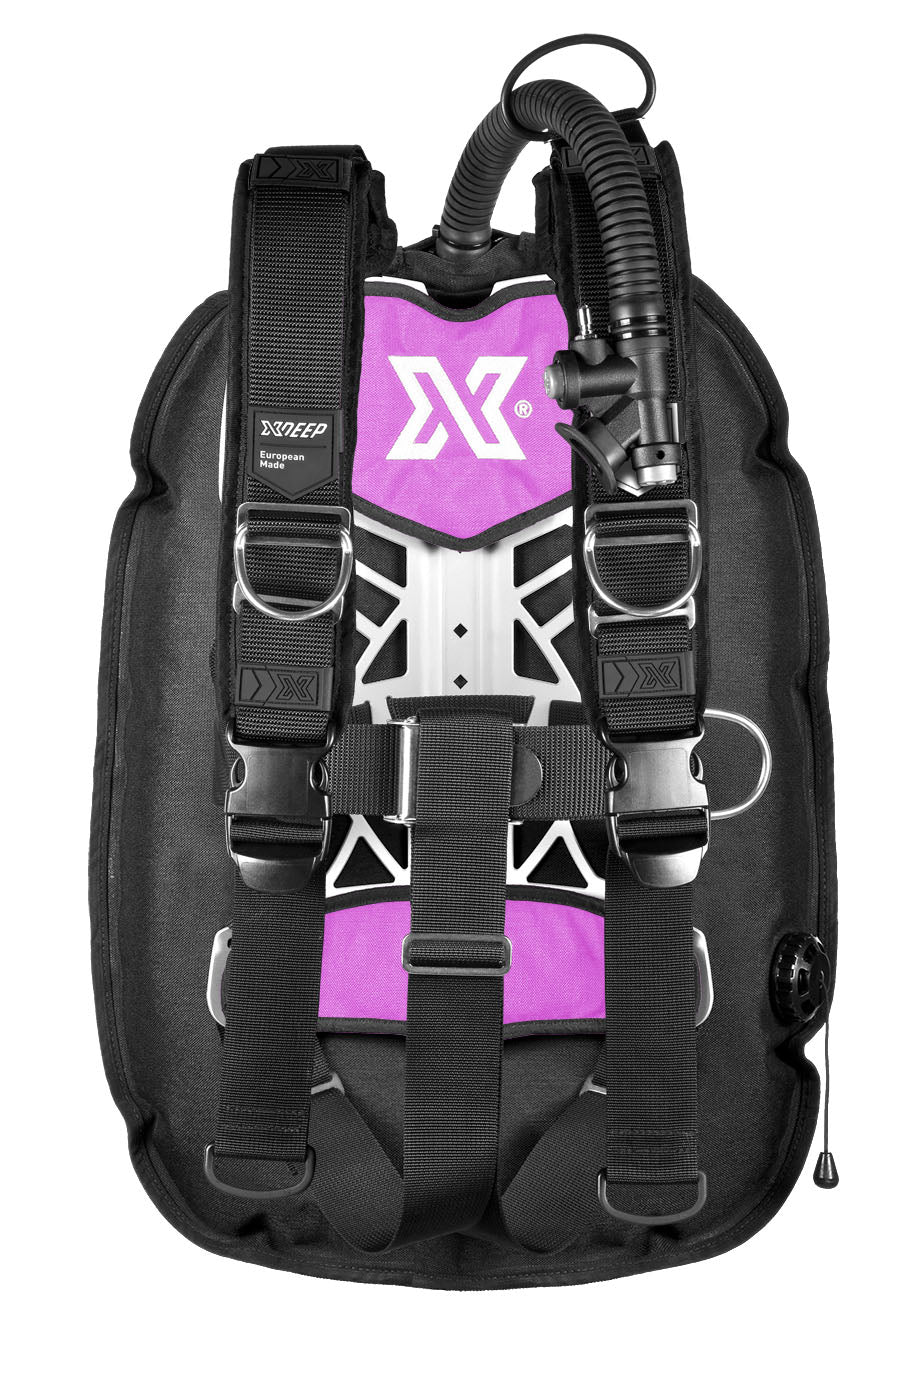 XDEEP XDEEP GHOST Full Setup with Standard or Deluxe harness Lavender / Deluxe / Small - Oyster Diving